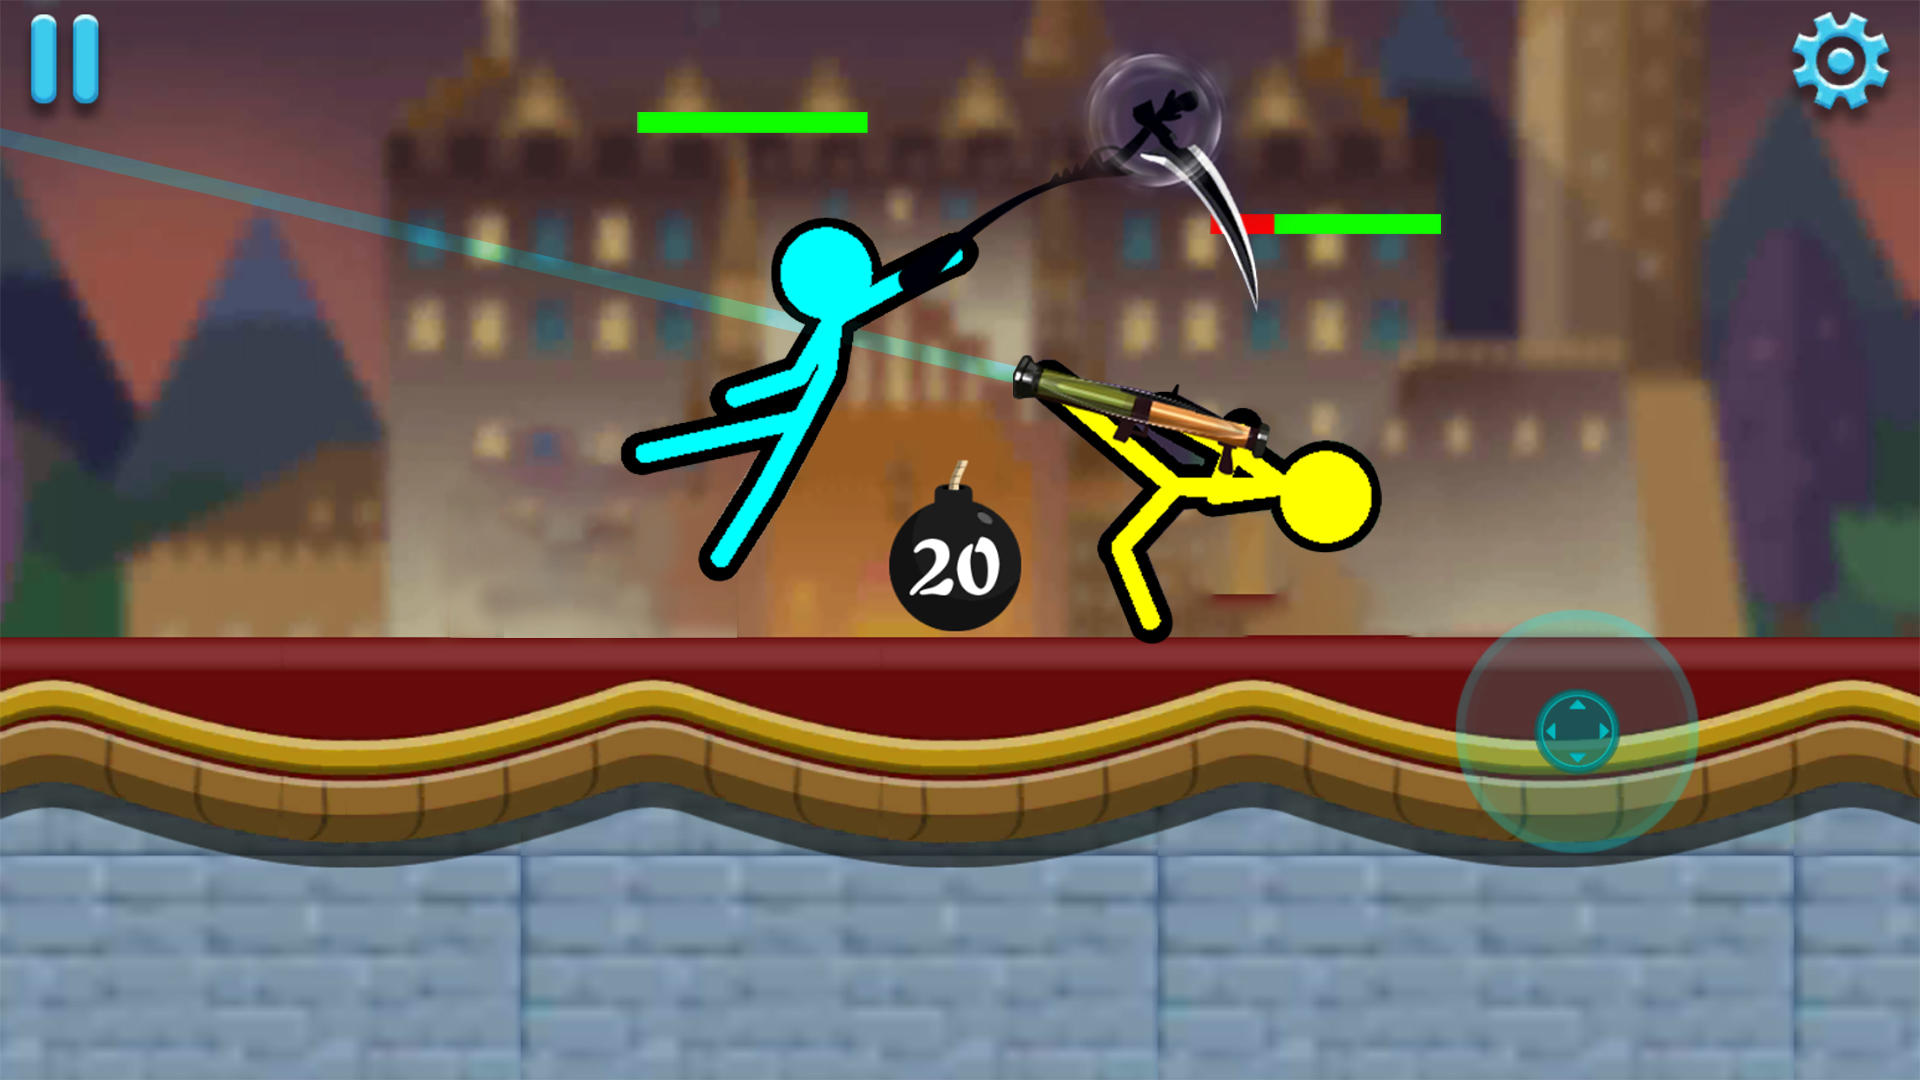 Super Stickman Fight - Online Game - Play for Free